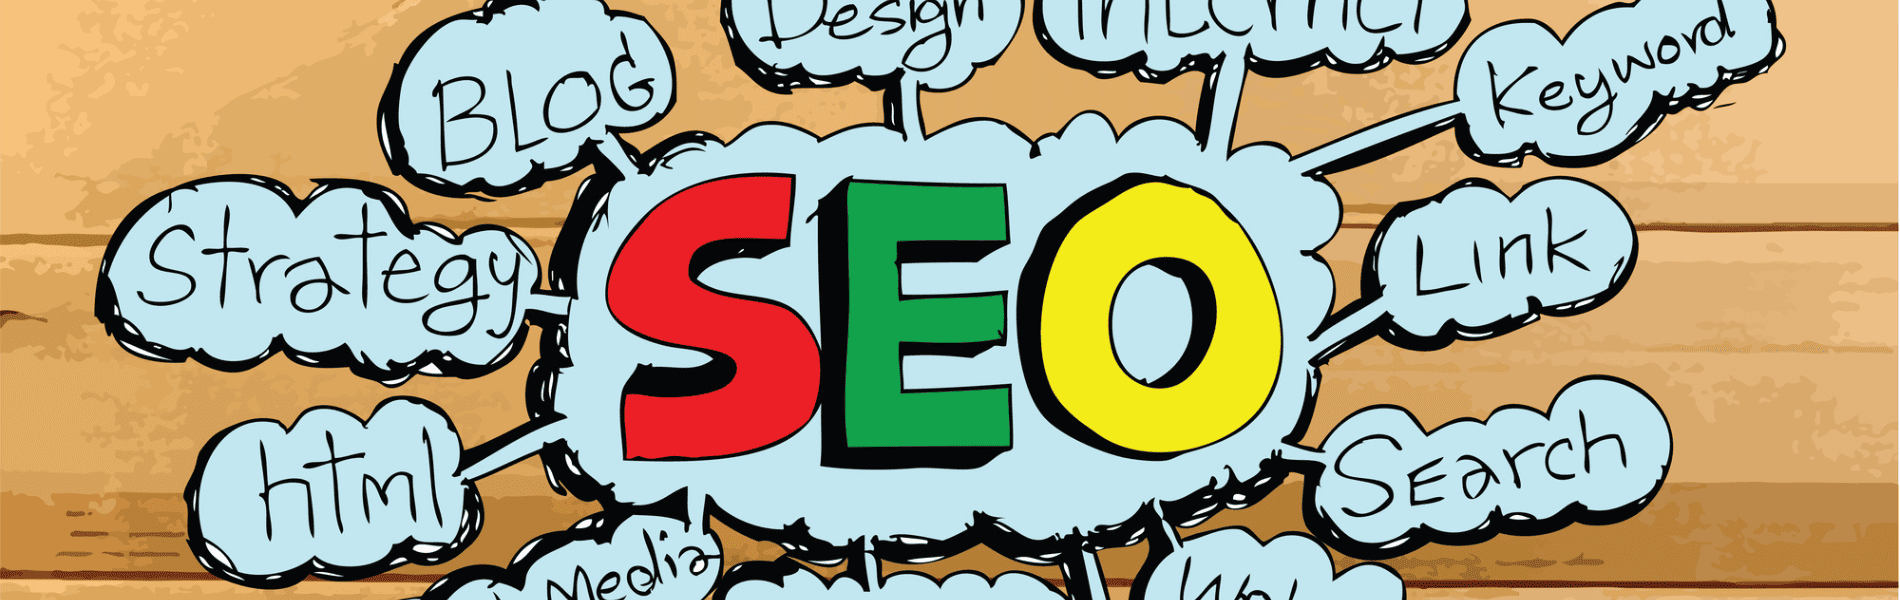 what is an SEO company